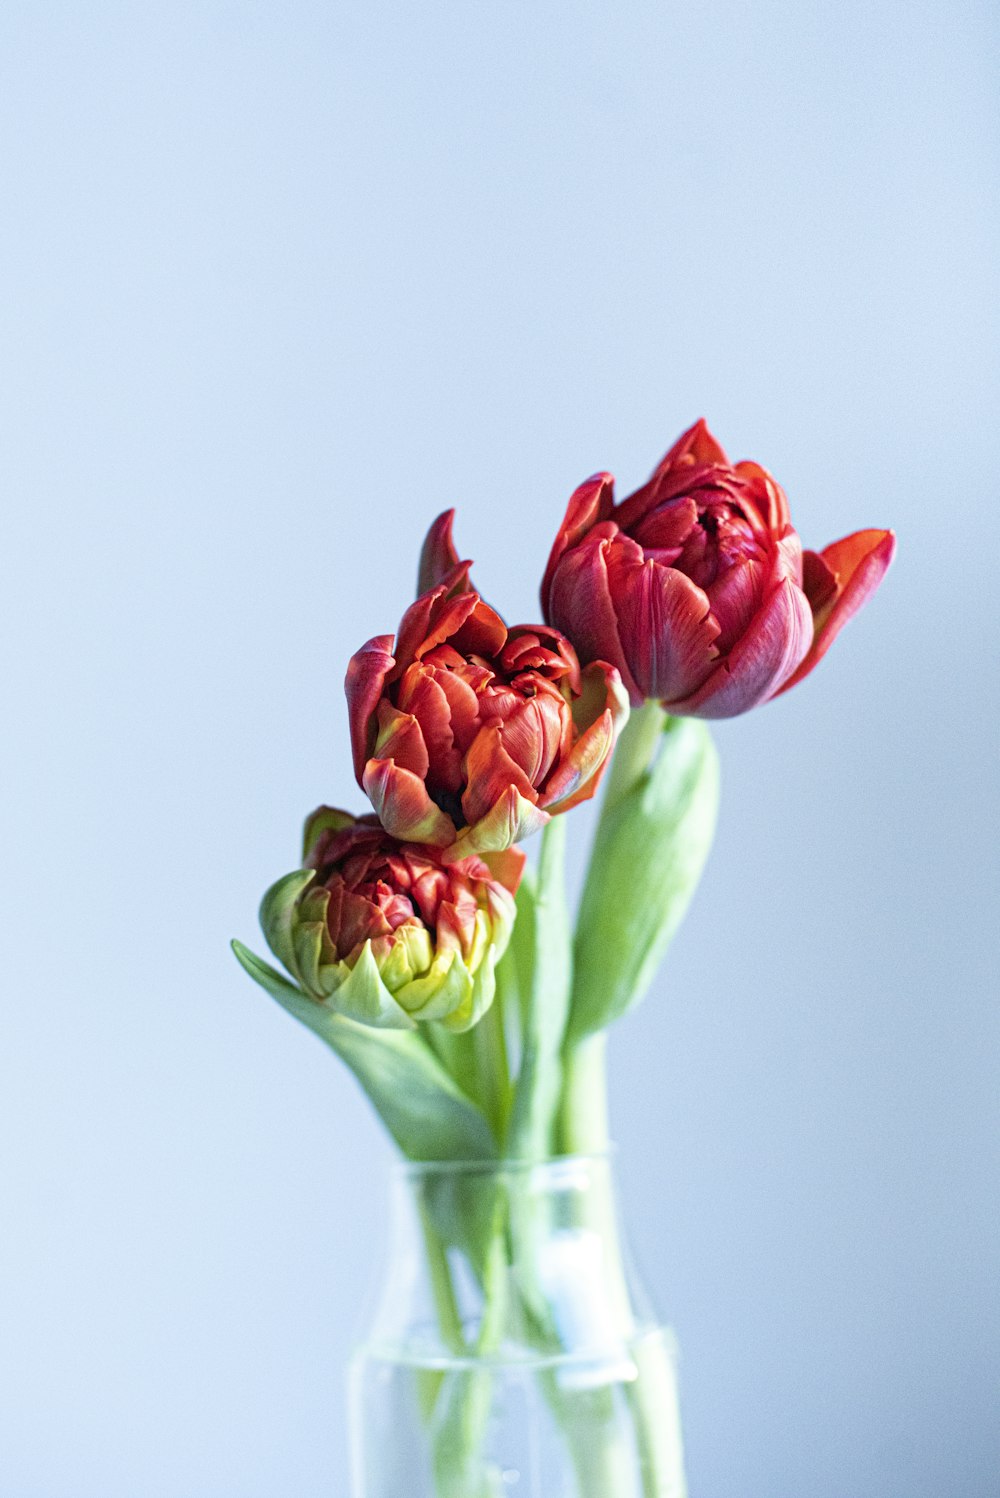 red tulips in clear glass vase